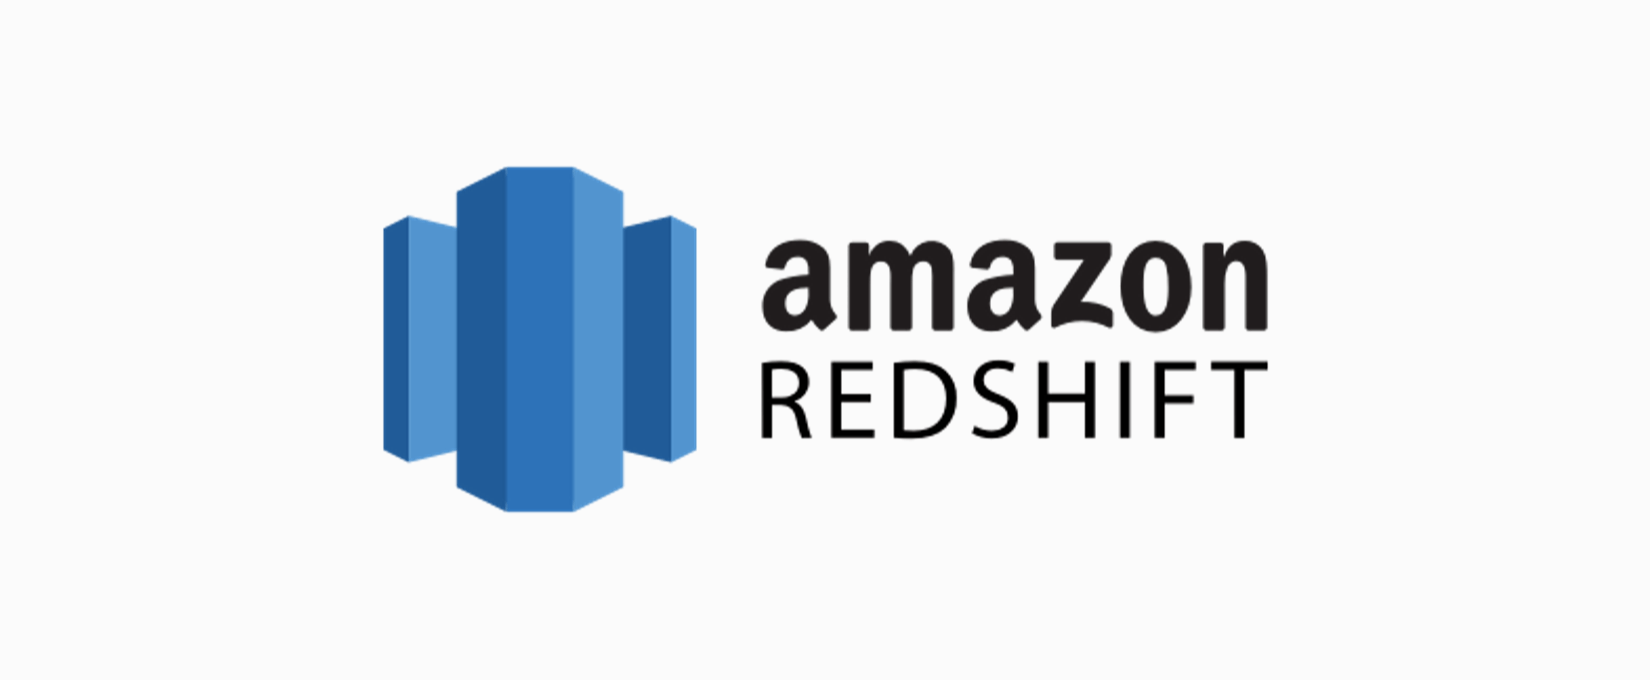 Top 6 Amazon Redshift Interview Questions